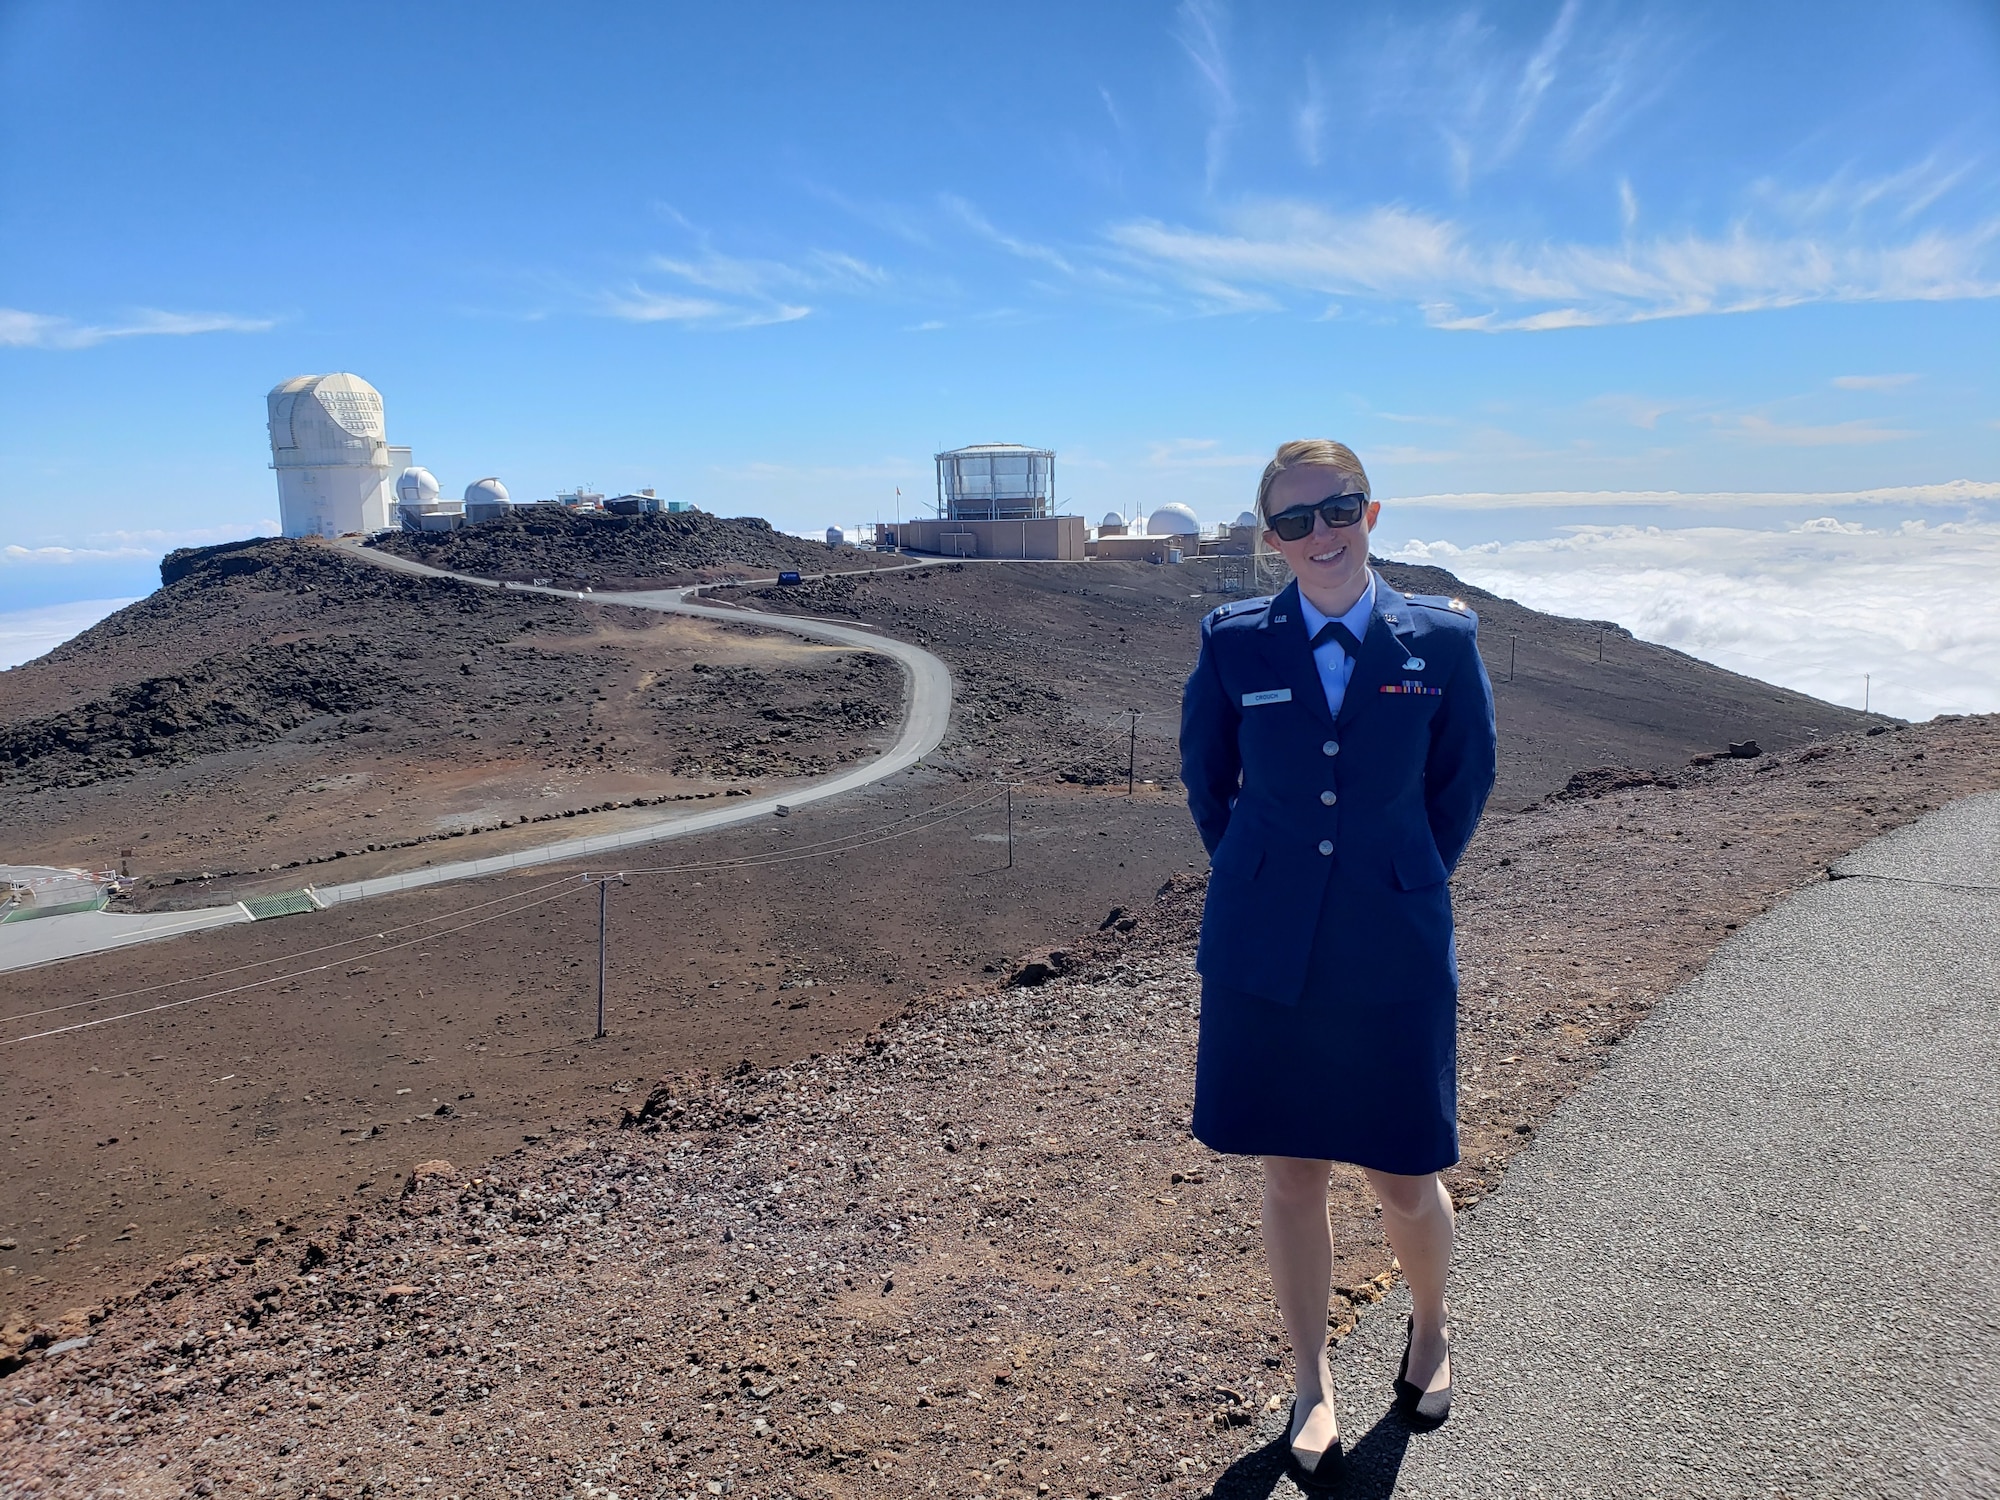 Air Force Research Laboratory engineer Capt. Tara Crouch with AFRL’s Maui Space Surveillance Complex in the background. The MSSC, located on Maui’s Haleakala Summit, is home to the DOD's largest optical telescope, the 3.6-meter Advanced Electro-Optical System. (Courtesy photo)